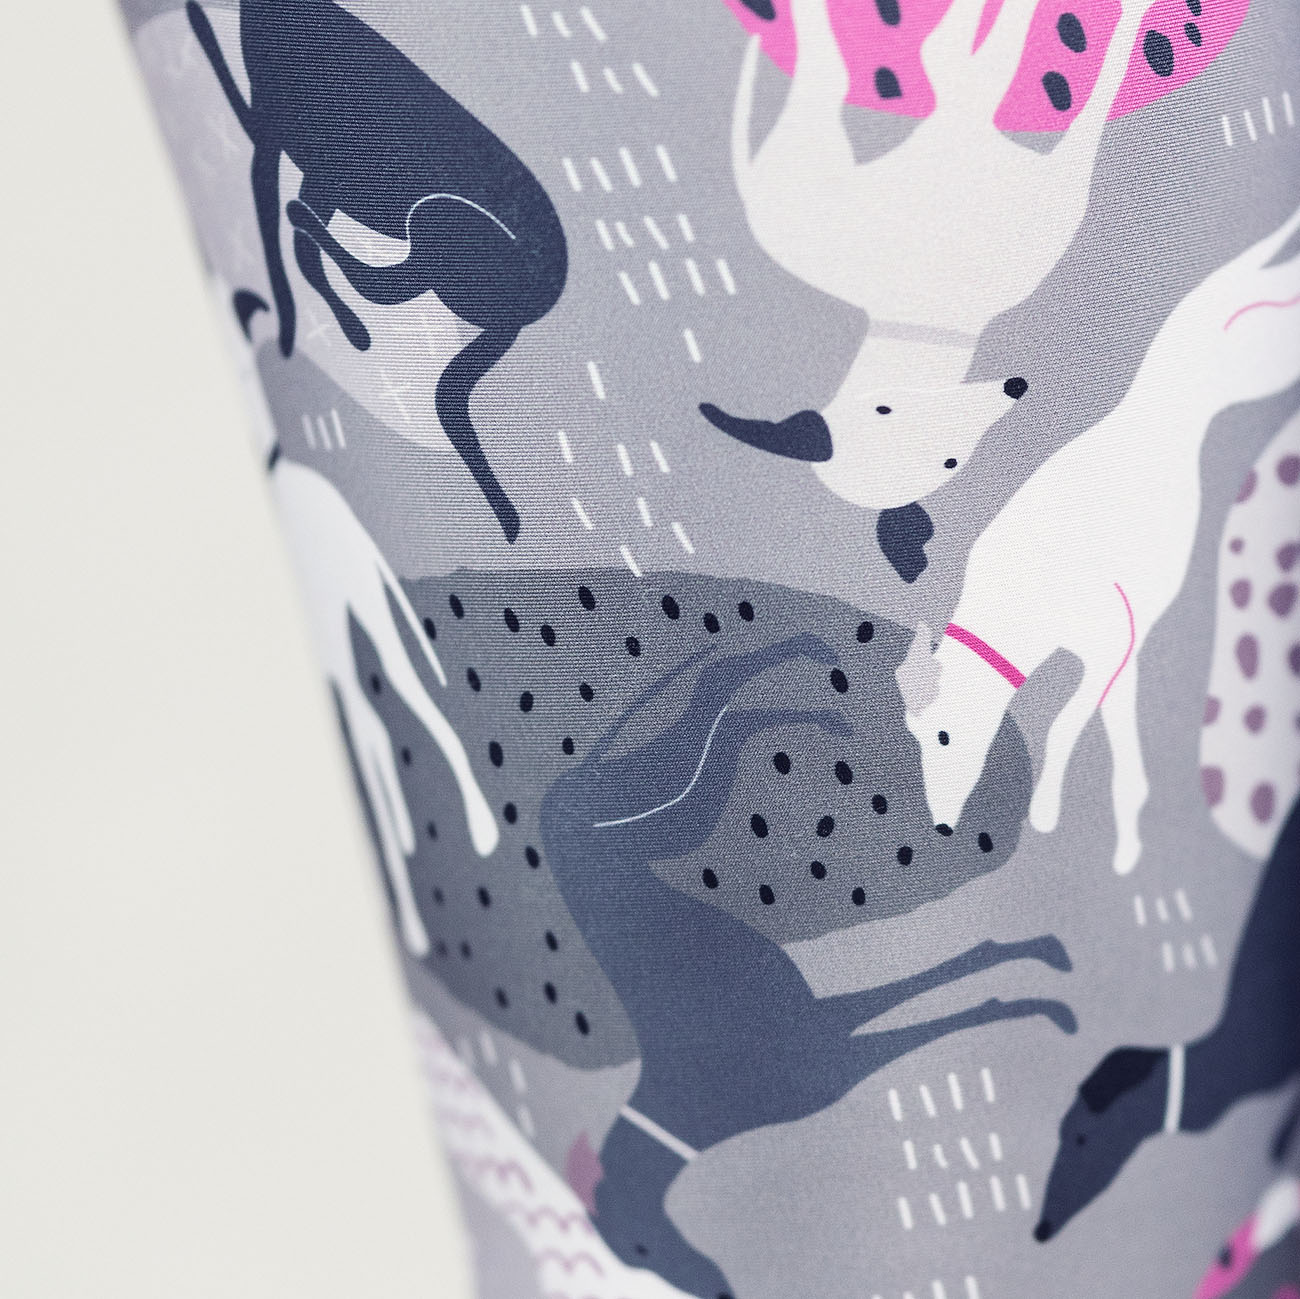 Sighthound leggings SIGHTHIE PINK - Wear.Chartbeat image 4